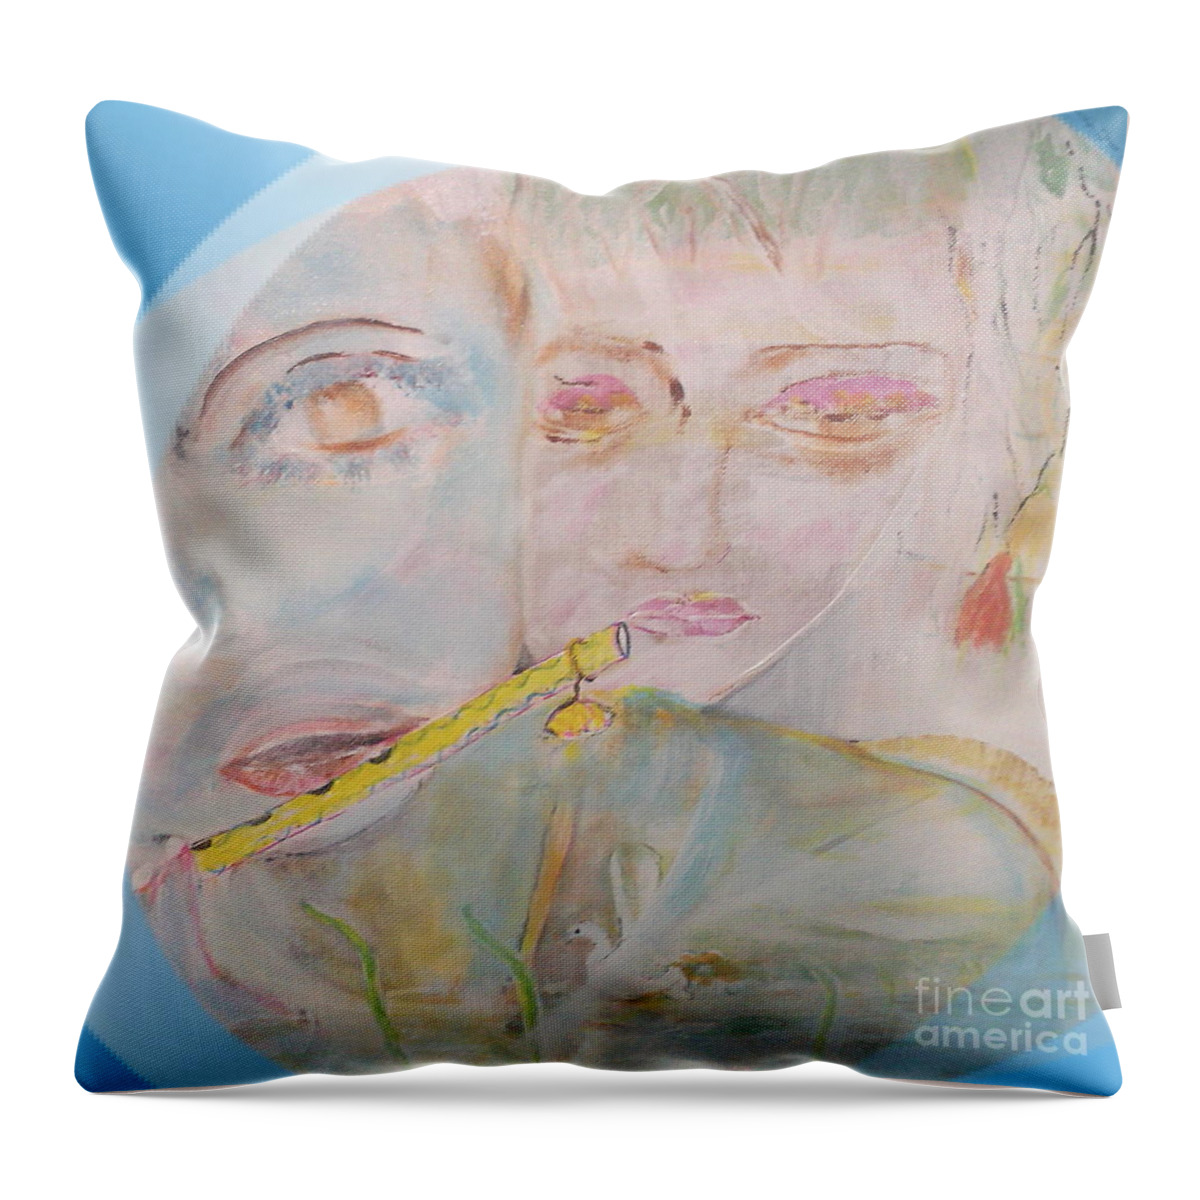 Romantic Throw Pillow featuring the painting Her flute player by Subrata Bose